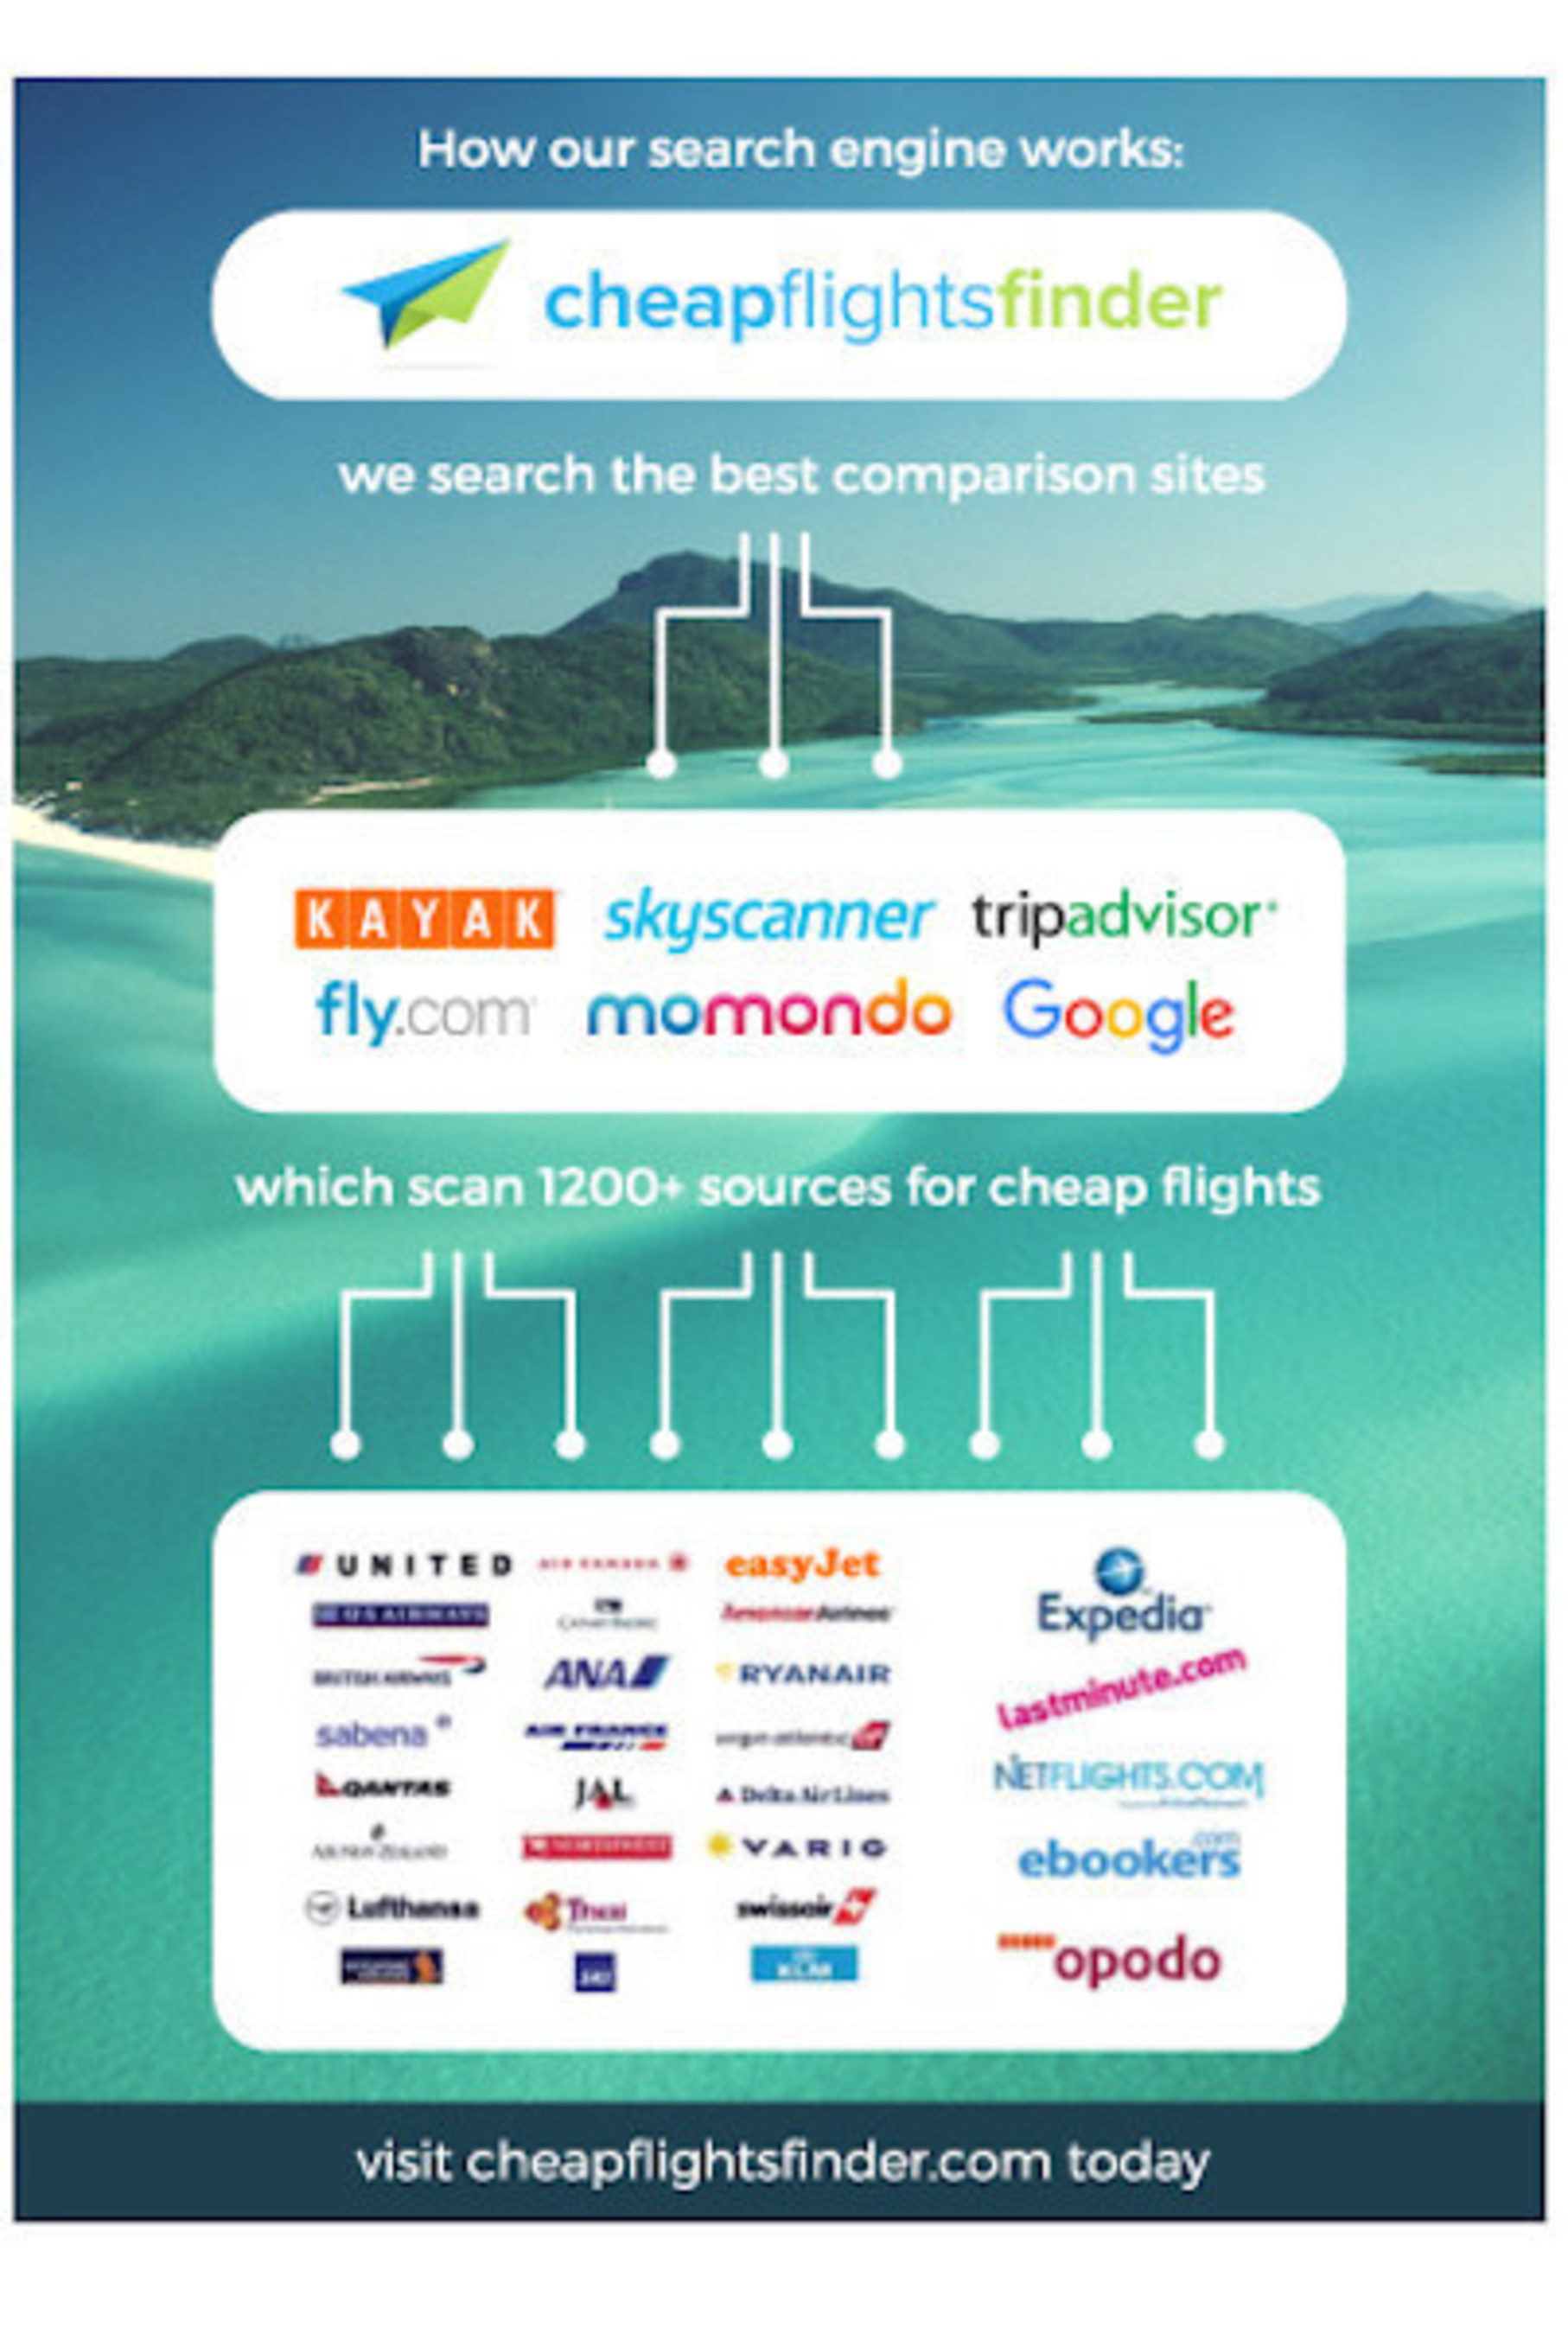 CheapFlightsFinder Introduces World's First Meta-Meta Flight Search(R) Dashboard to Instantly Find Rock-bottom Fares Across Leading Comparison Sites Like Google Flights and KAYAK